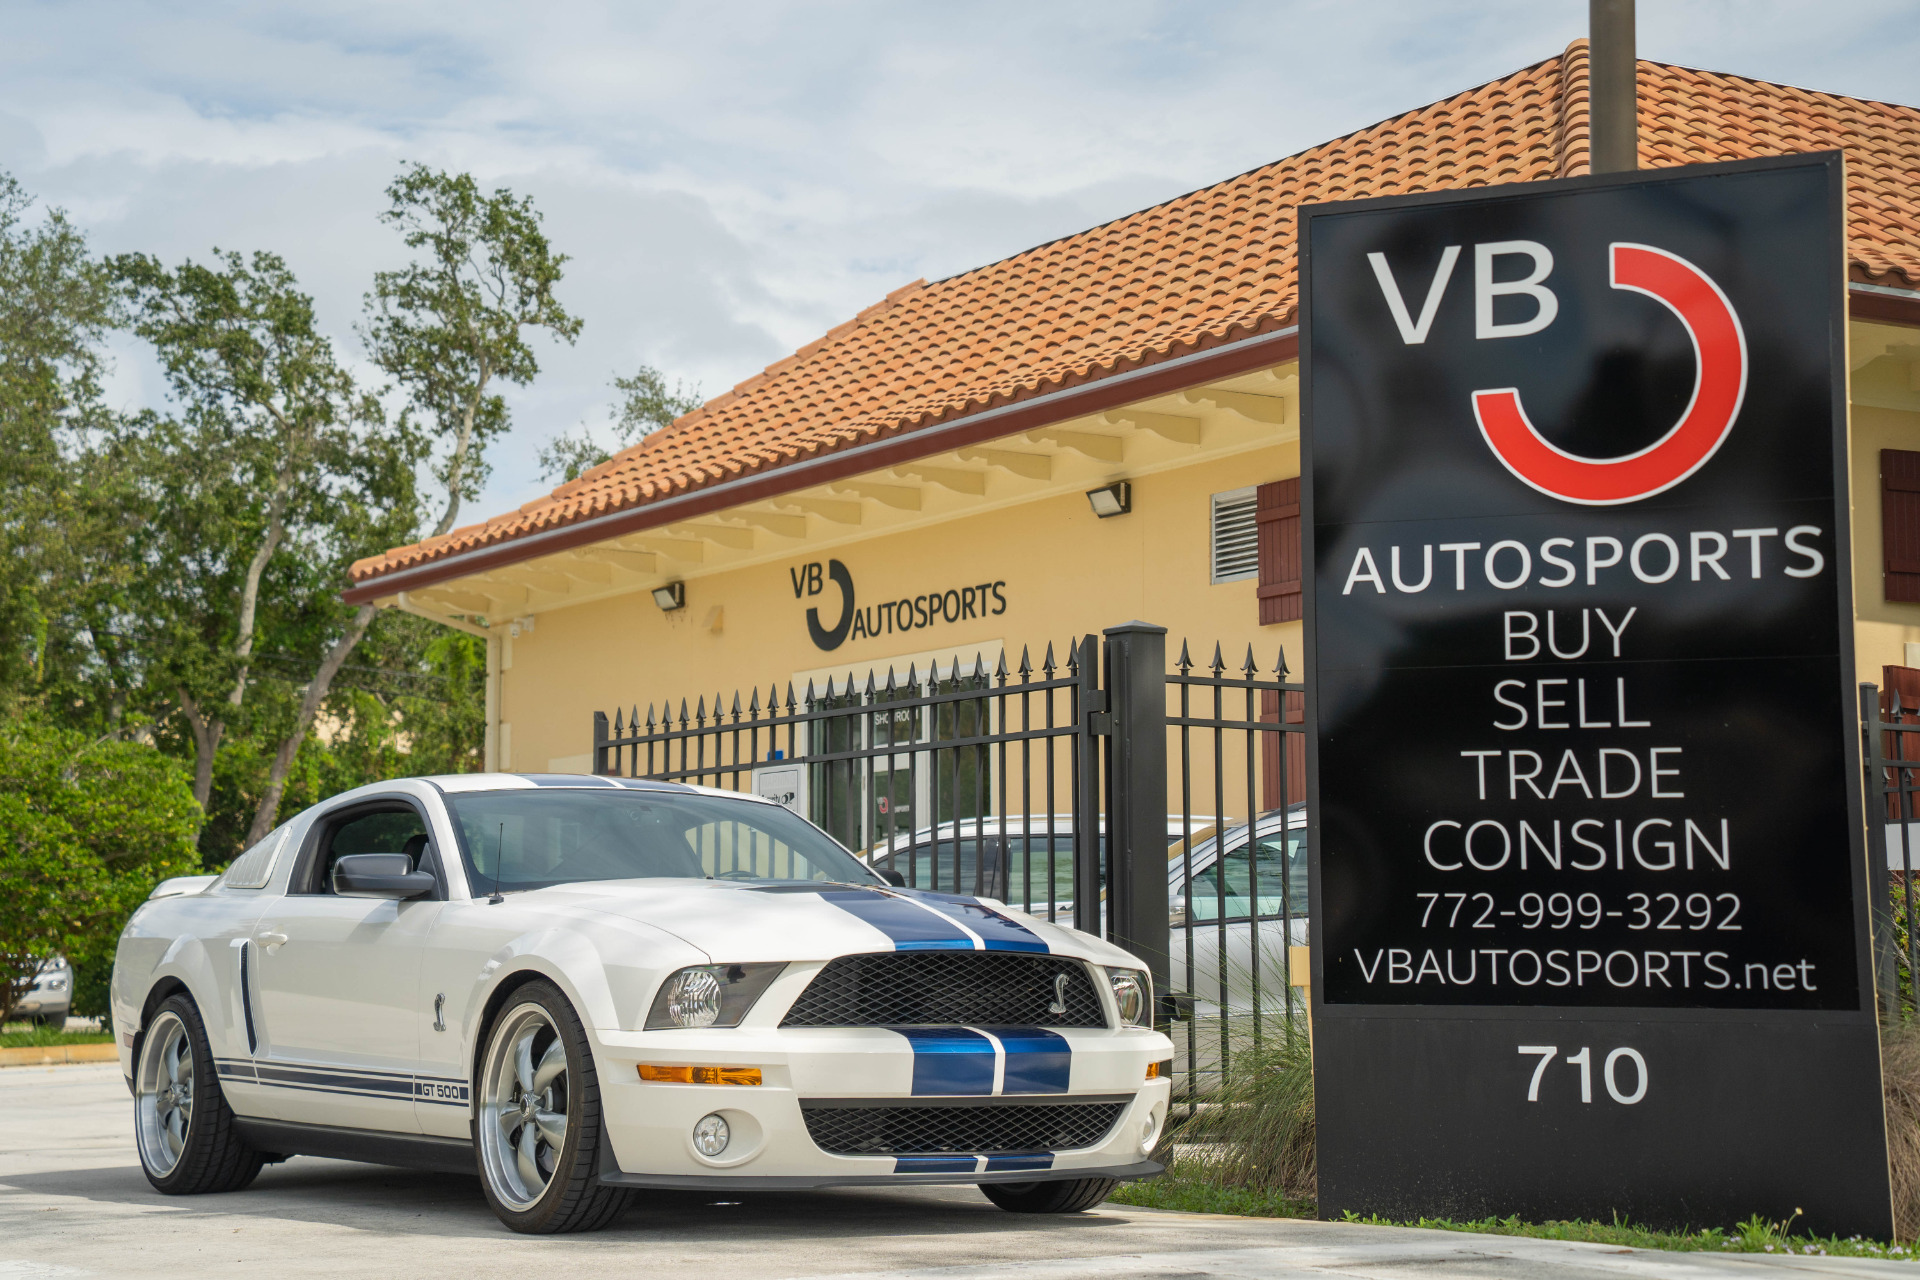 Pre-Owned 2007 Ford Shelby GT500 For Sale (Sold) | VB Autosports